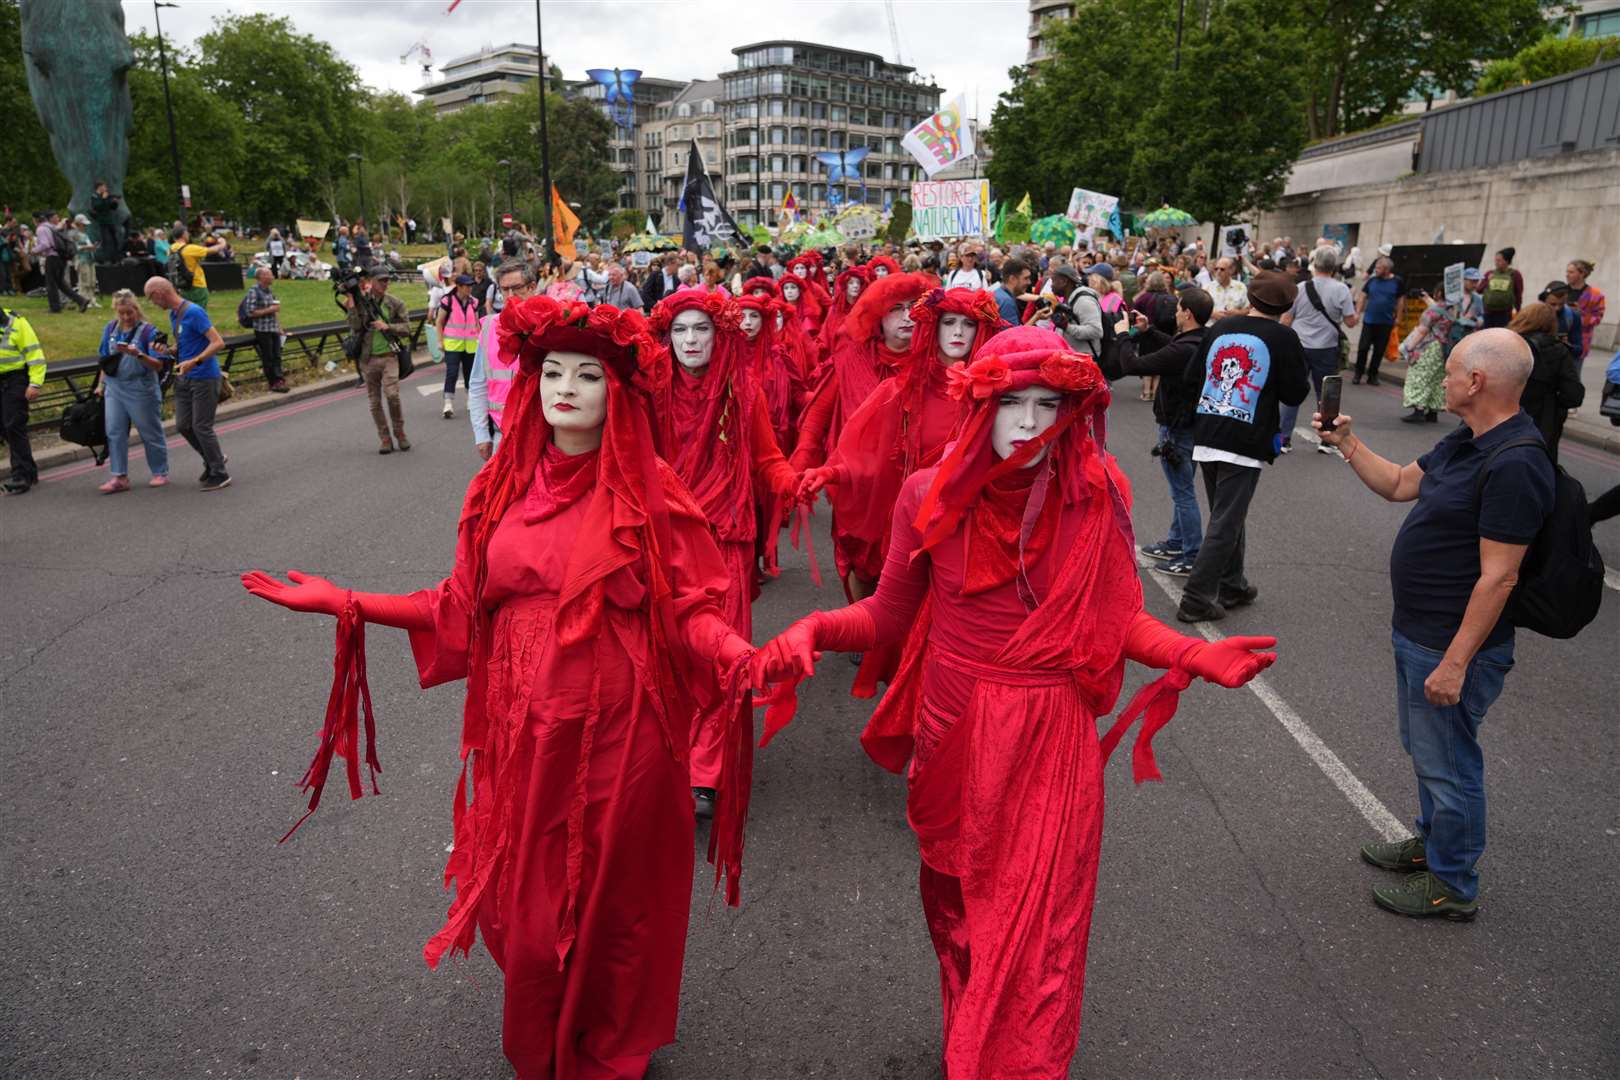 The Red Rebel Brigade took part in the march (Jeff Moore/PA)